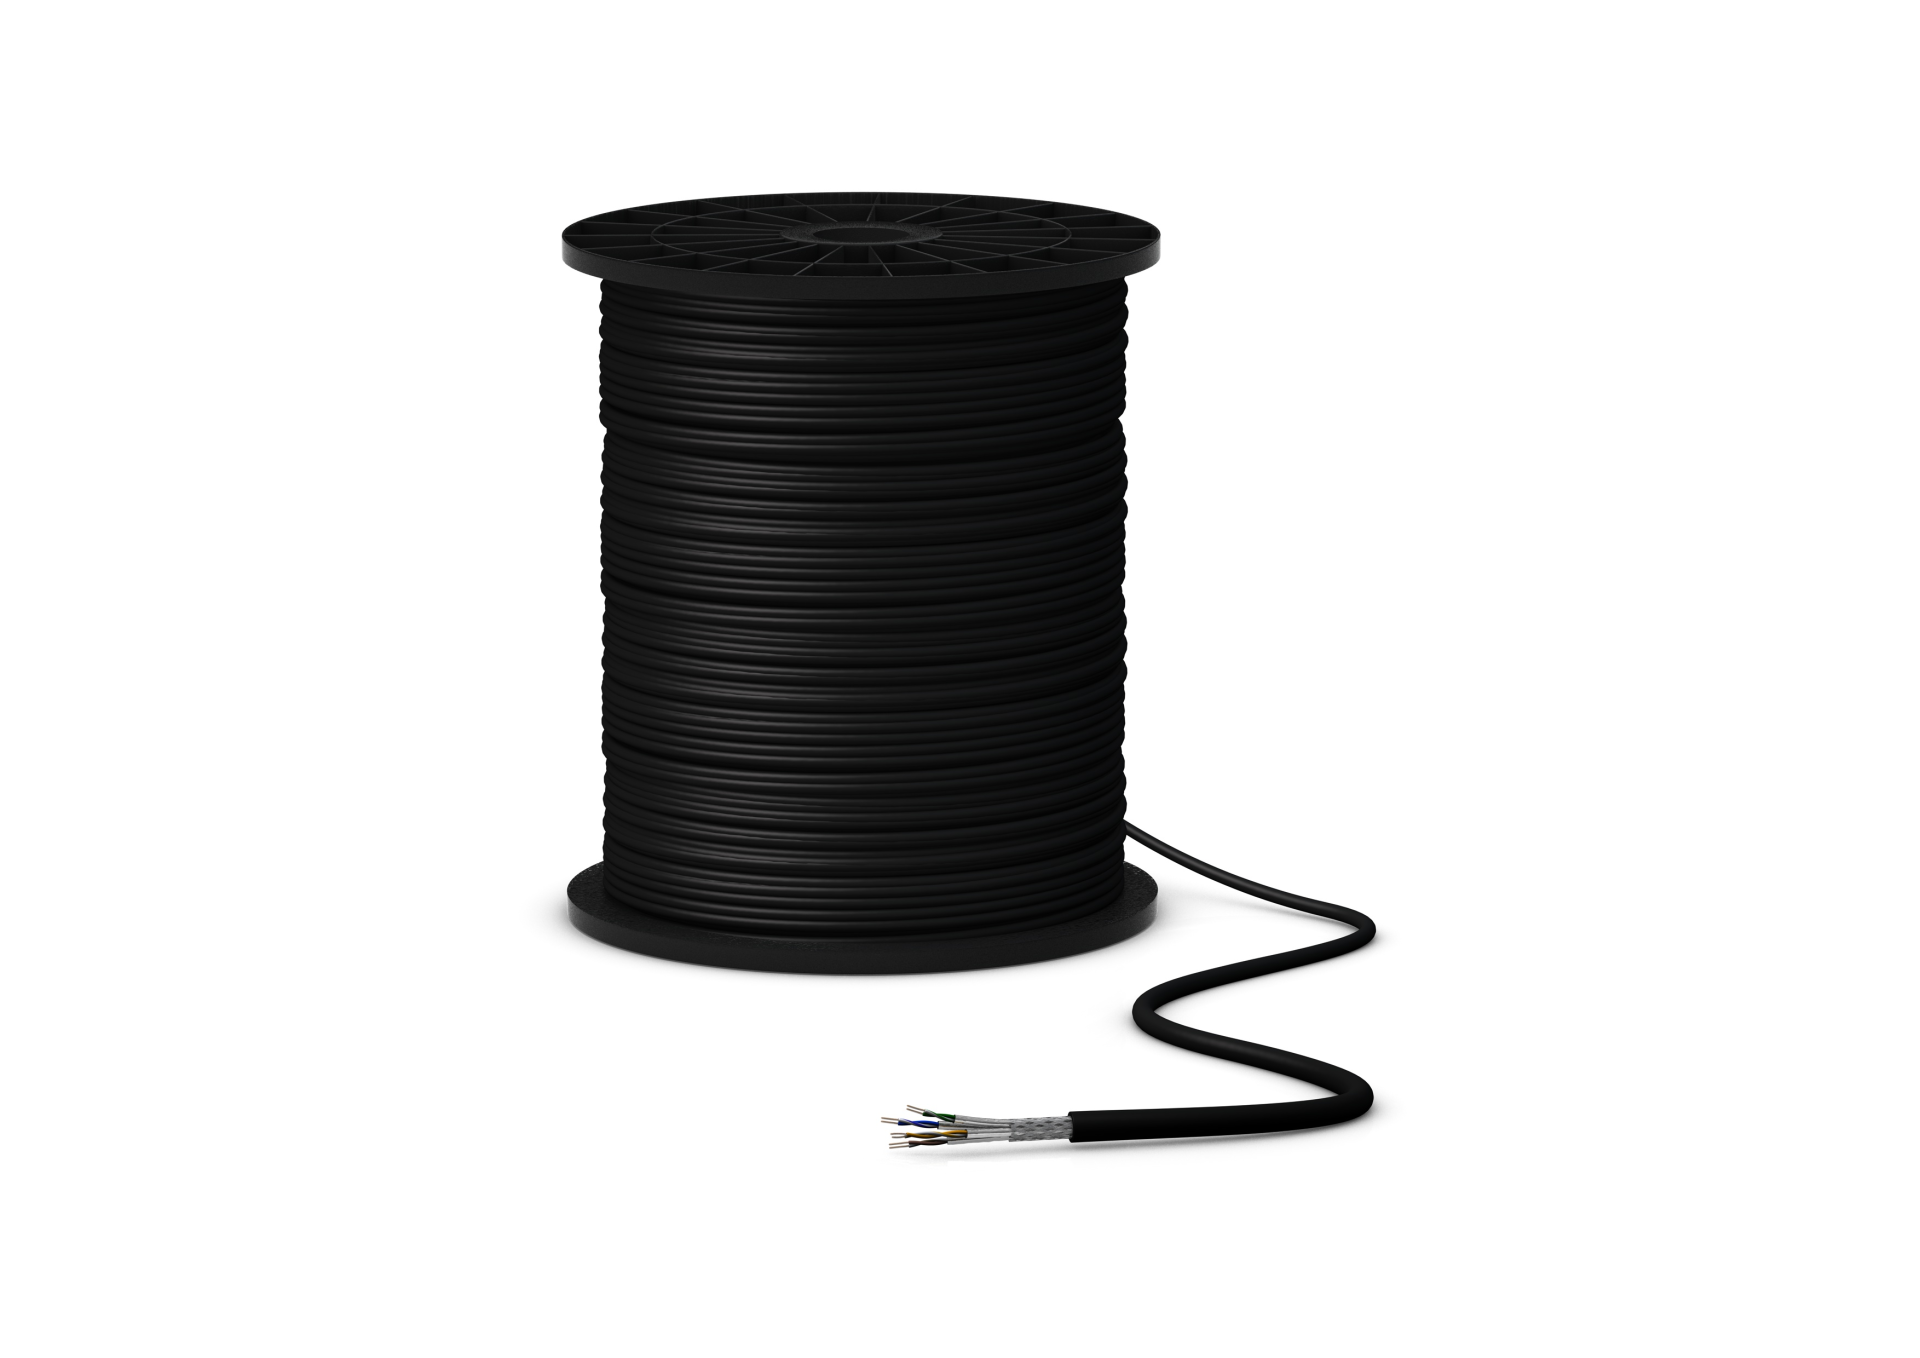 Draka GreenConnect Cat.7 Outdoor Cable S/FTP PE,black, CPR Fca